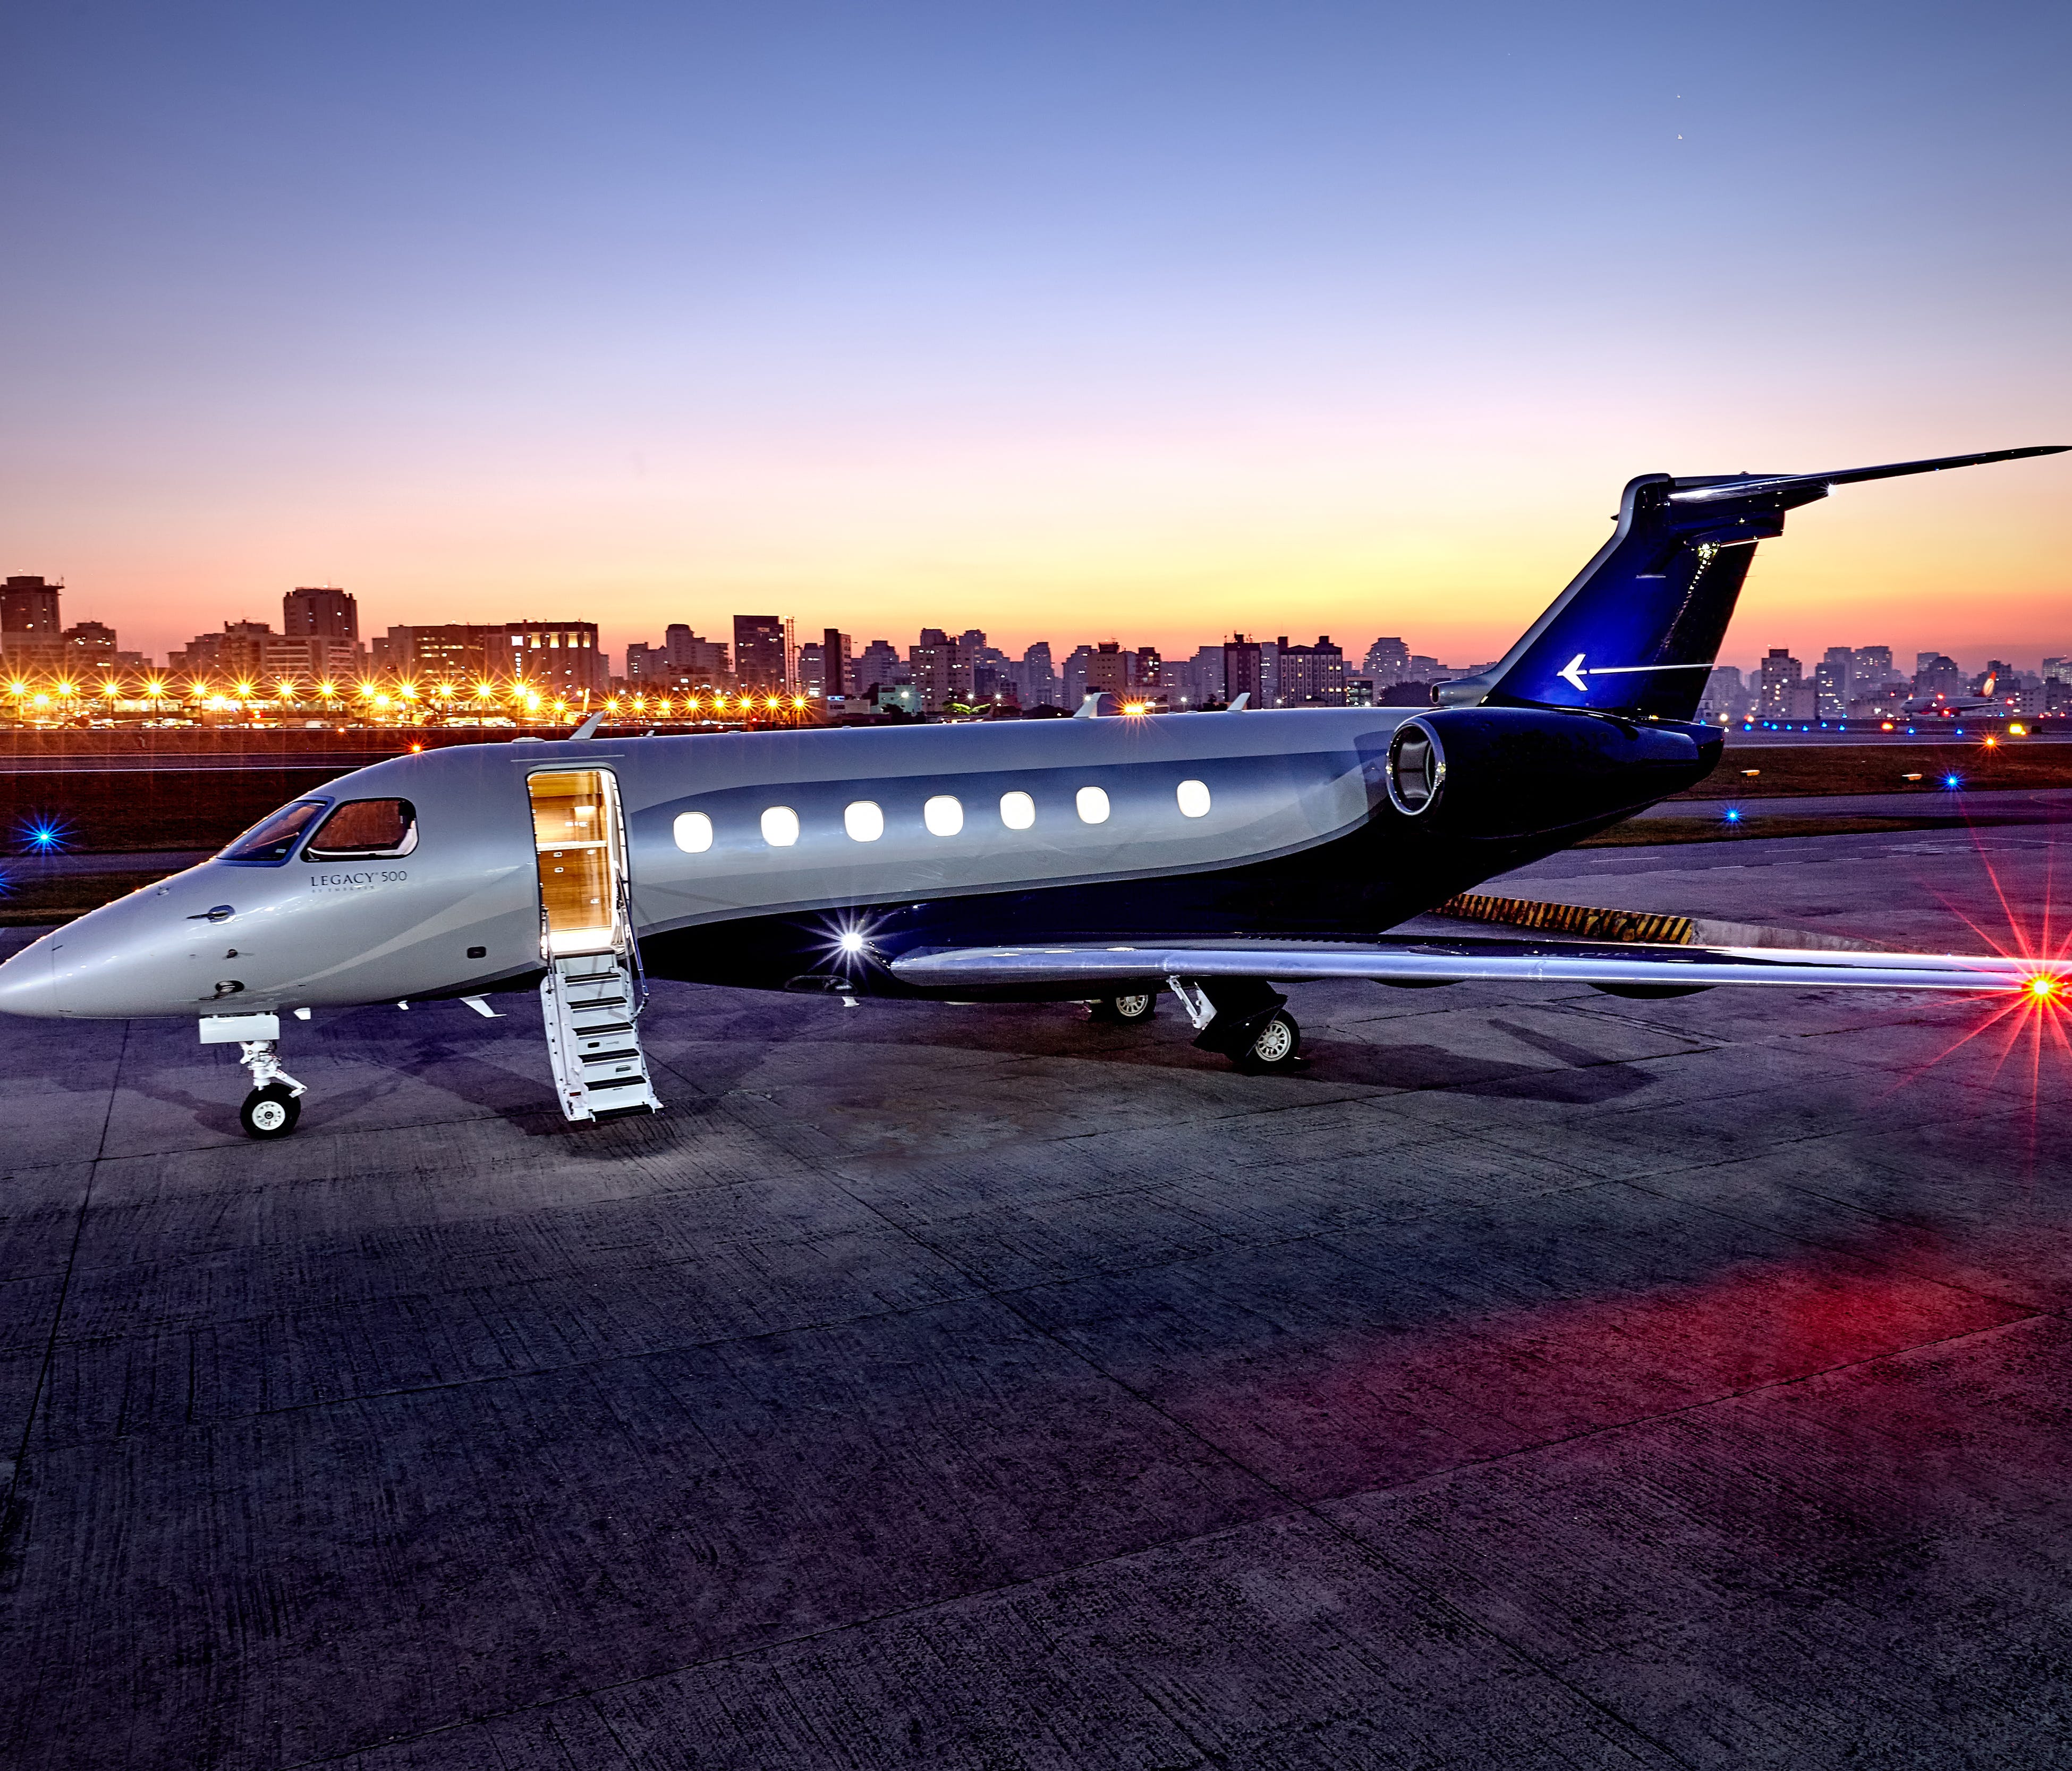 The Embraer Legacy 500 has a medium-sized cabin with a 6-foot flat-floor cabin suitable for eight club seats, which can also be converted into four beds for complete rest at a cabin altitude of 5,800 feet, the lowest in its class.